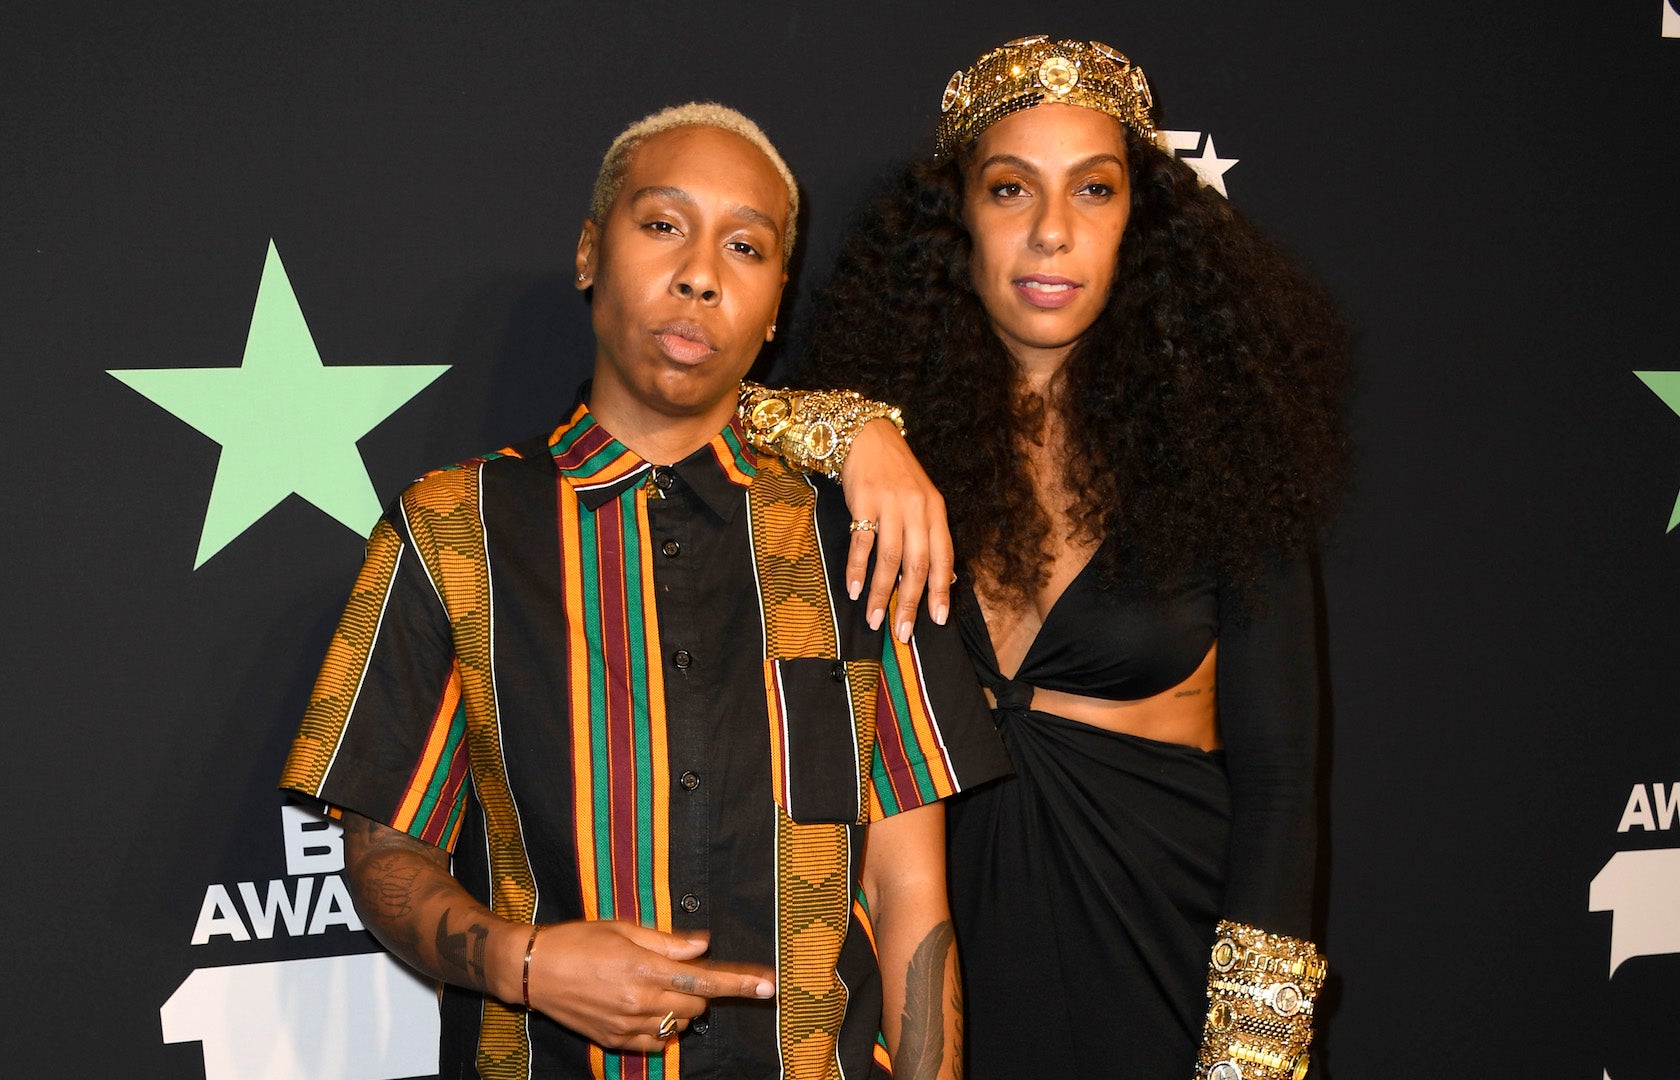 Lena Waithe Created 'Queen & Slim' For The Black Men And Women 'Who Didn’t Make It Home'